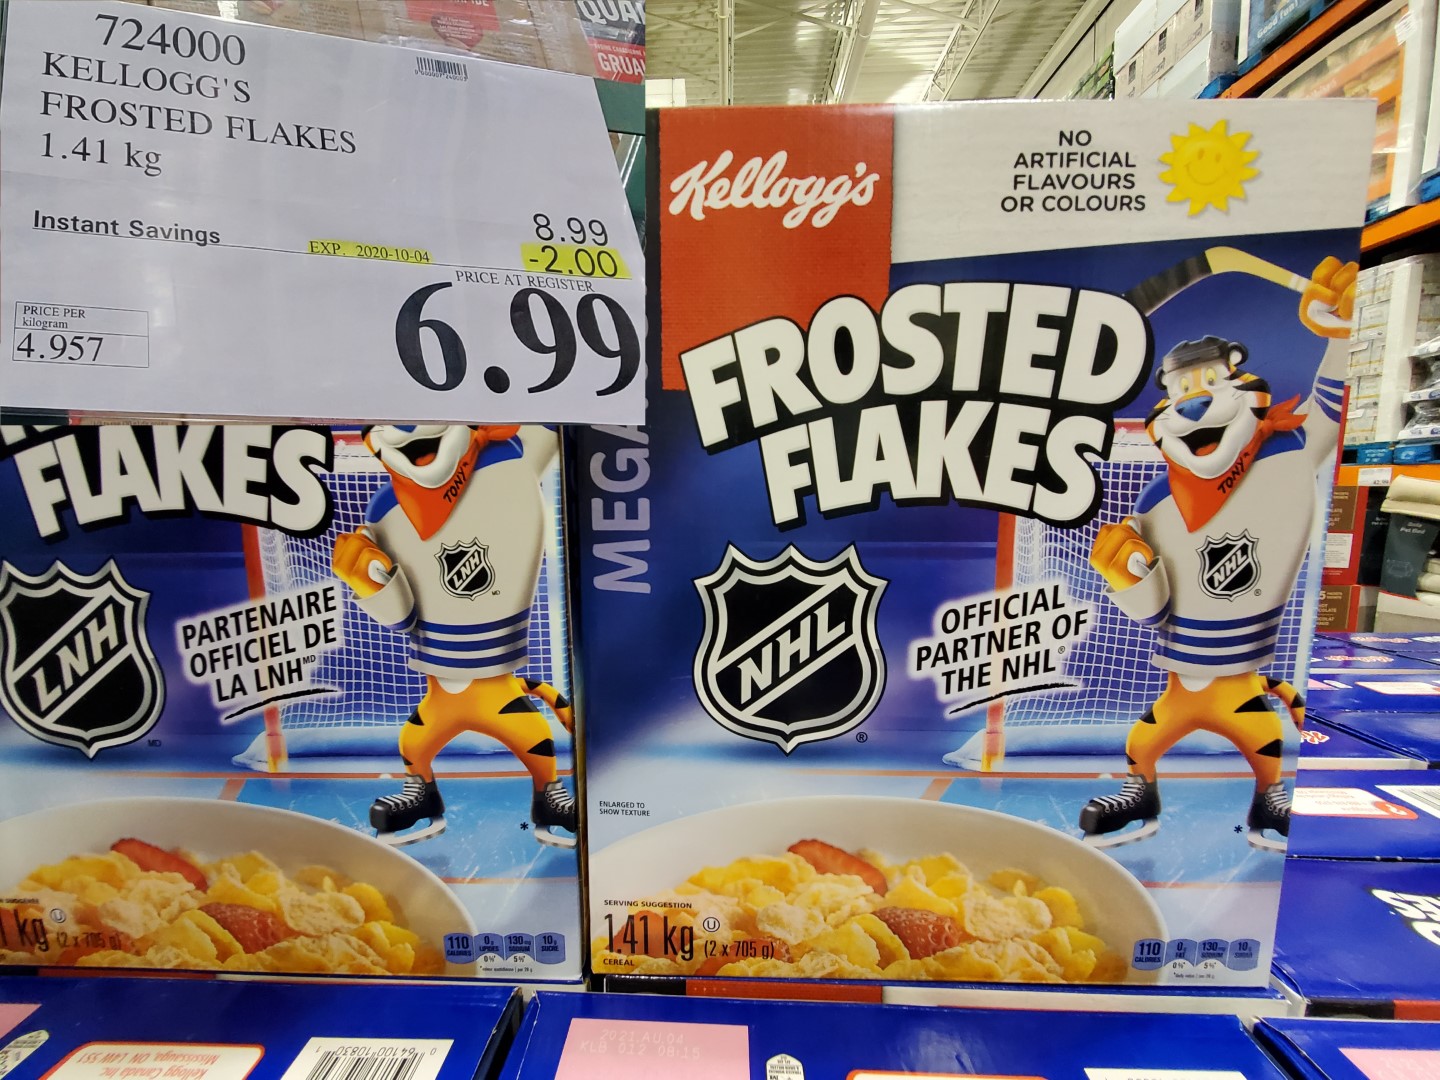 kellogg's frosted flakes